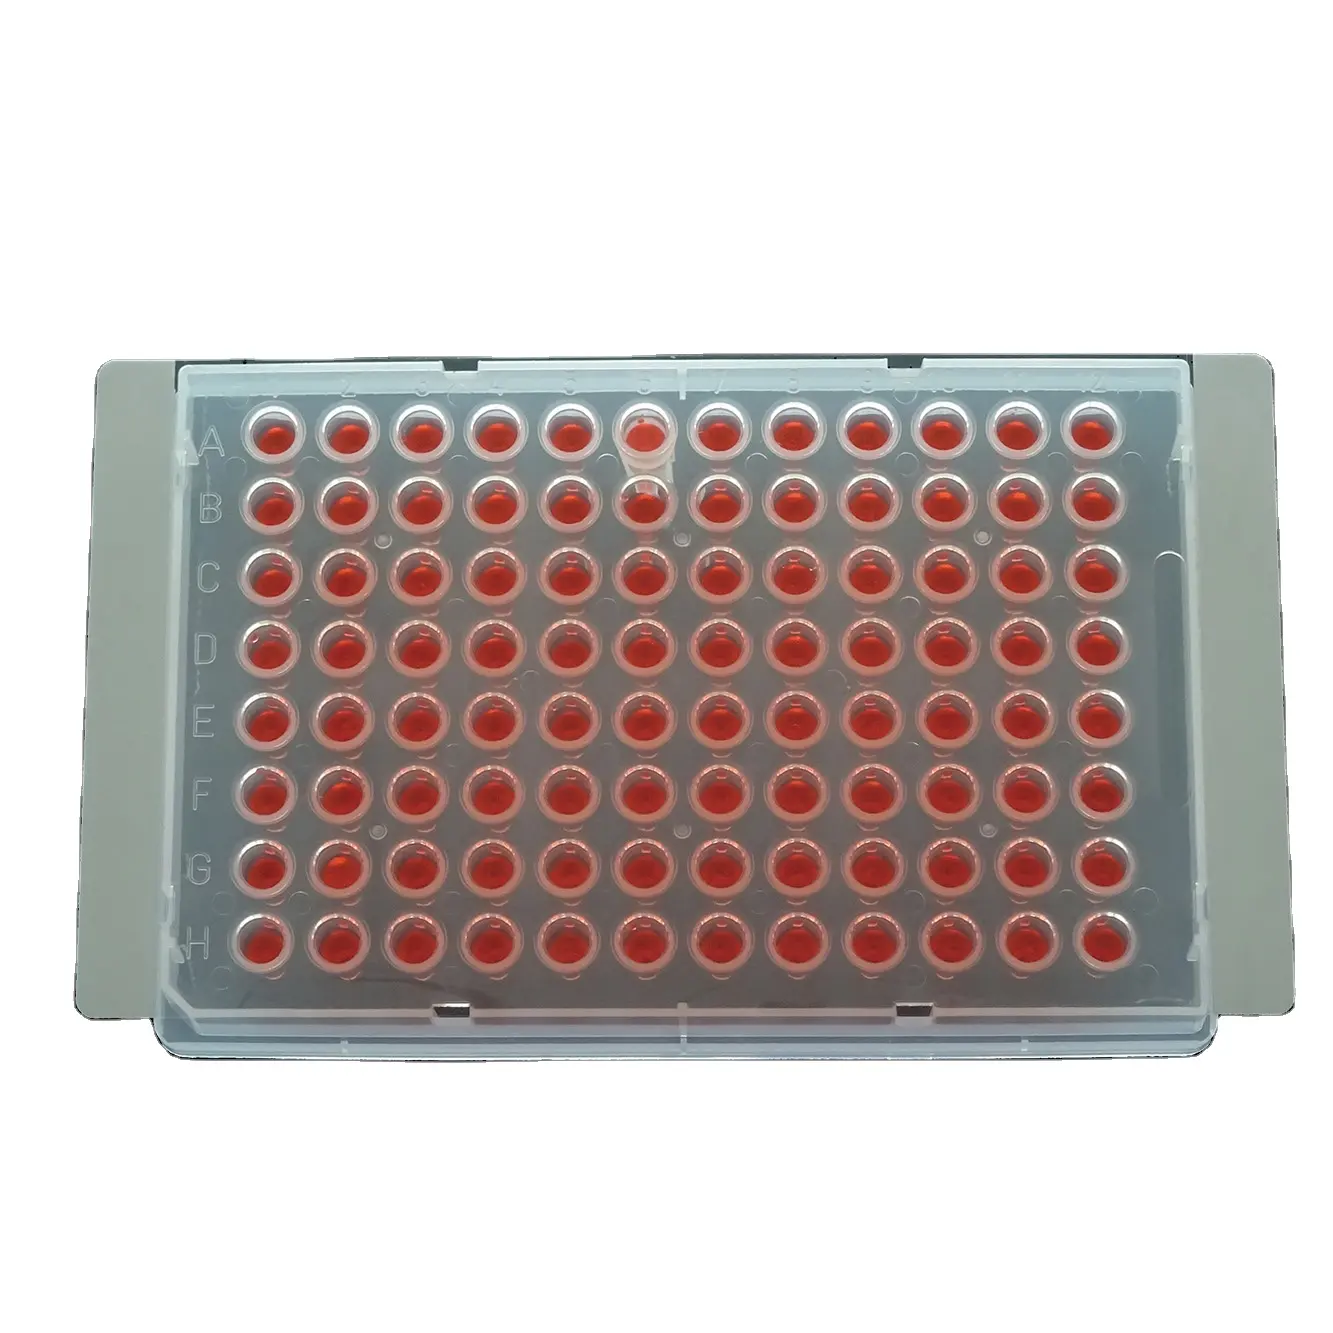 Labware 96 Well And Deep Well Microplate PCR QPCR Plate Sealing Films Plate Sealers Pcr Plate Sseal Film In Other Lab Supplies